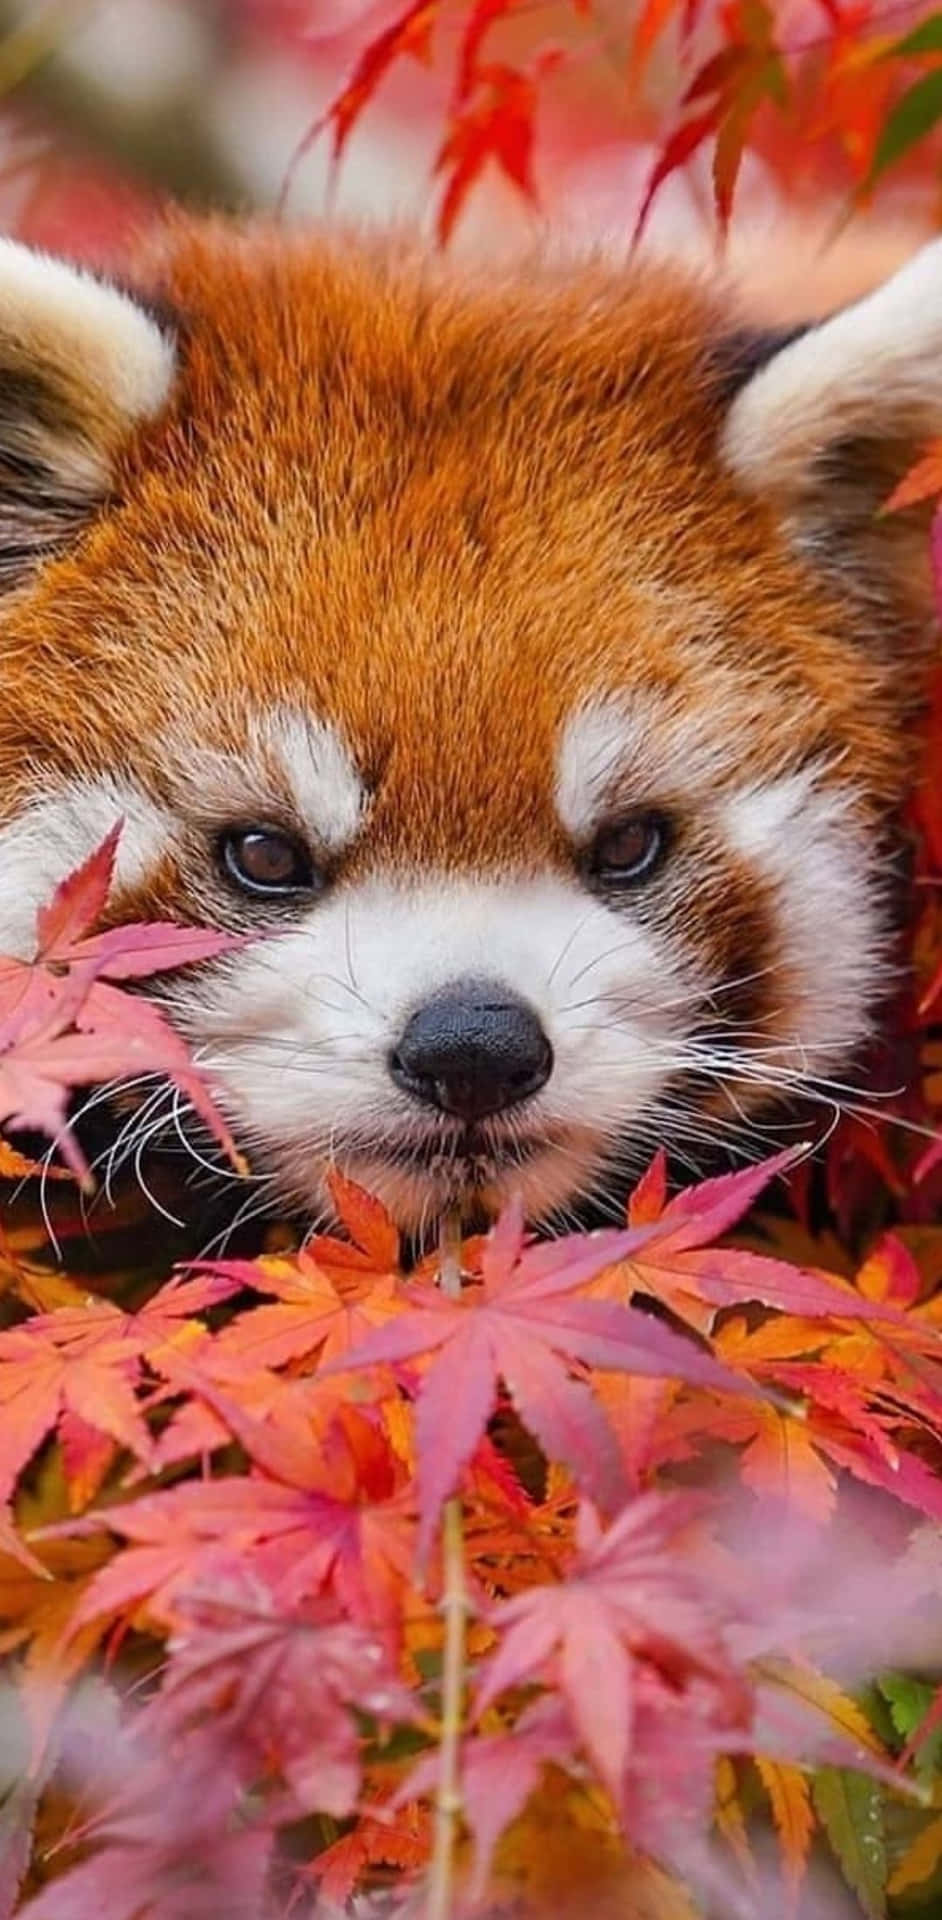 This Adorable Red Panda is Ready to Play! Wallpaper